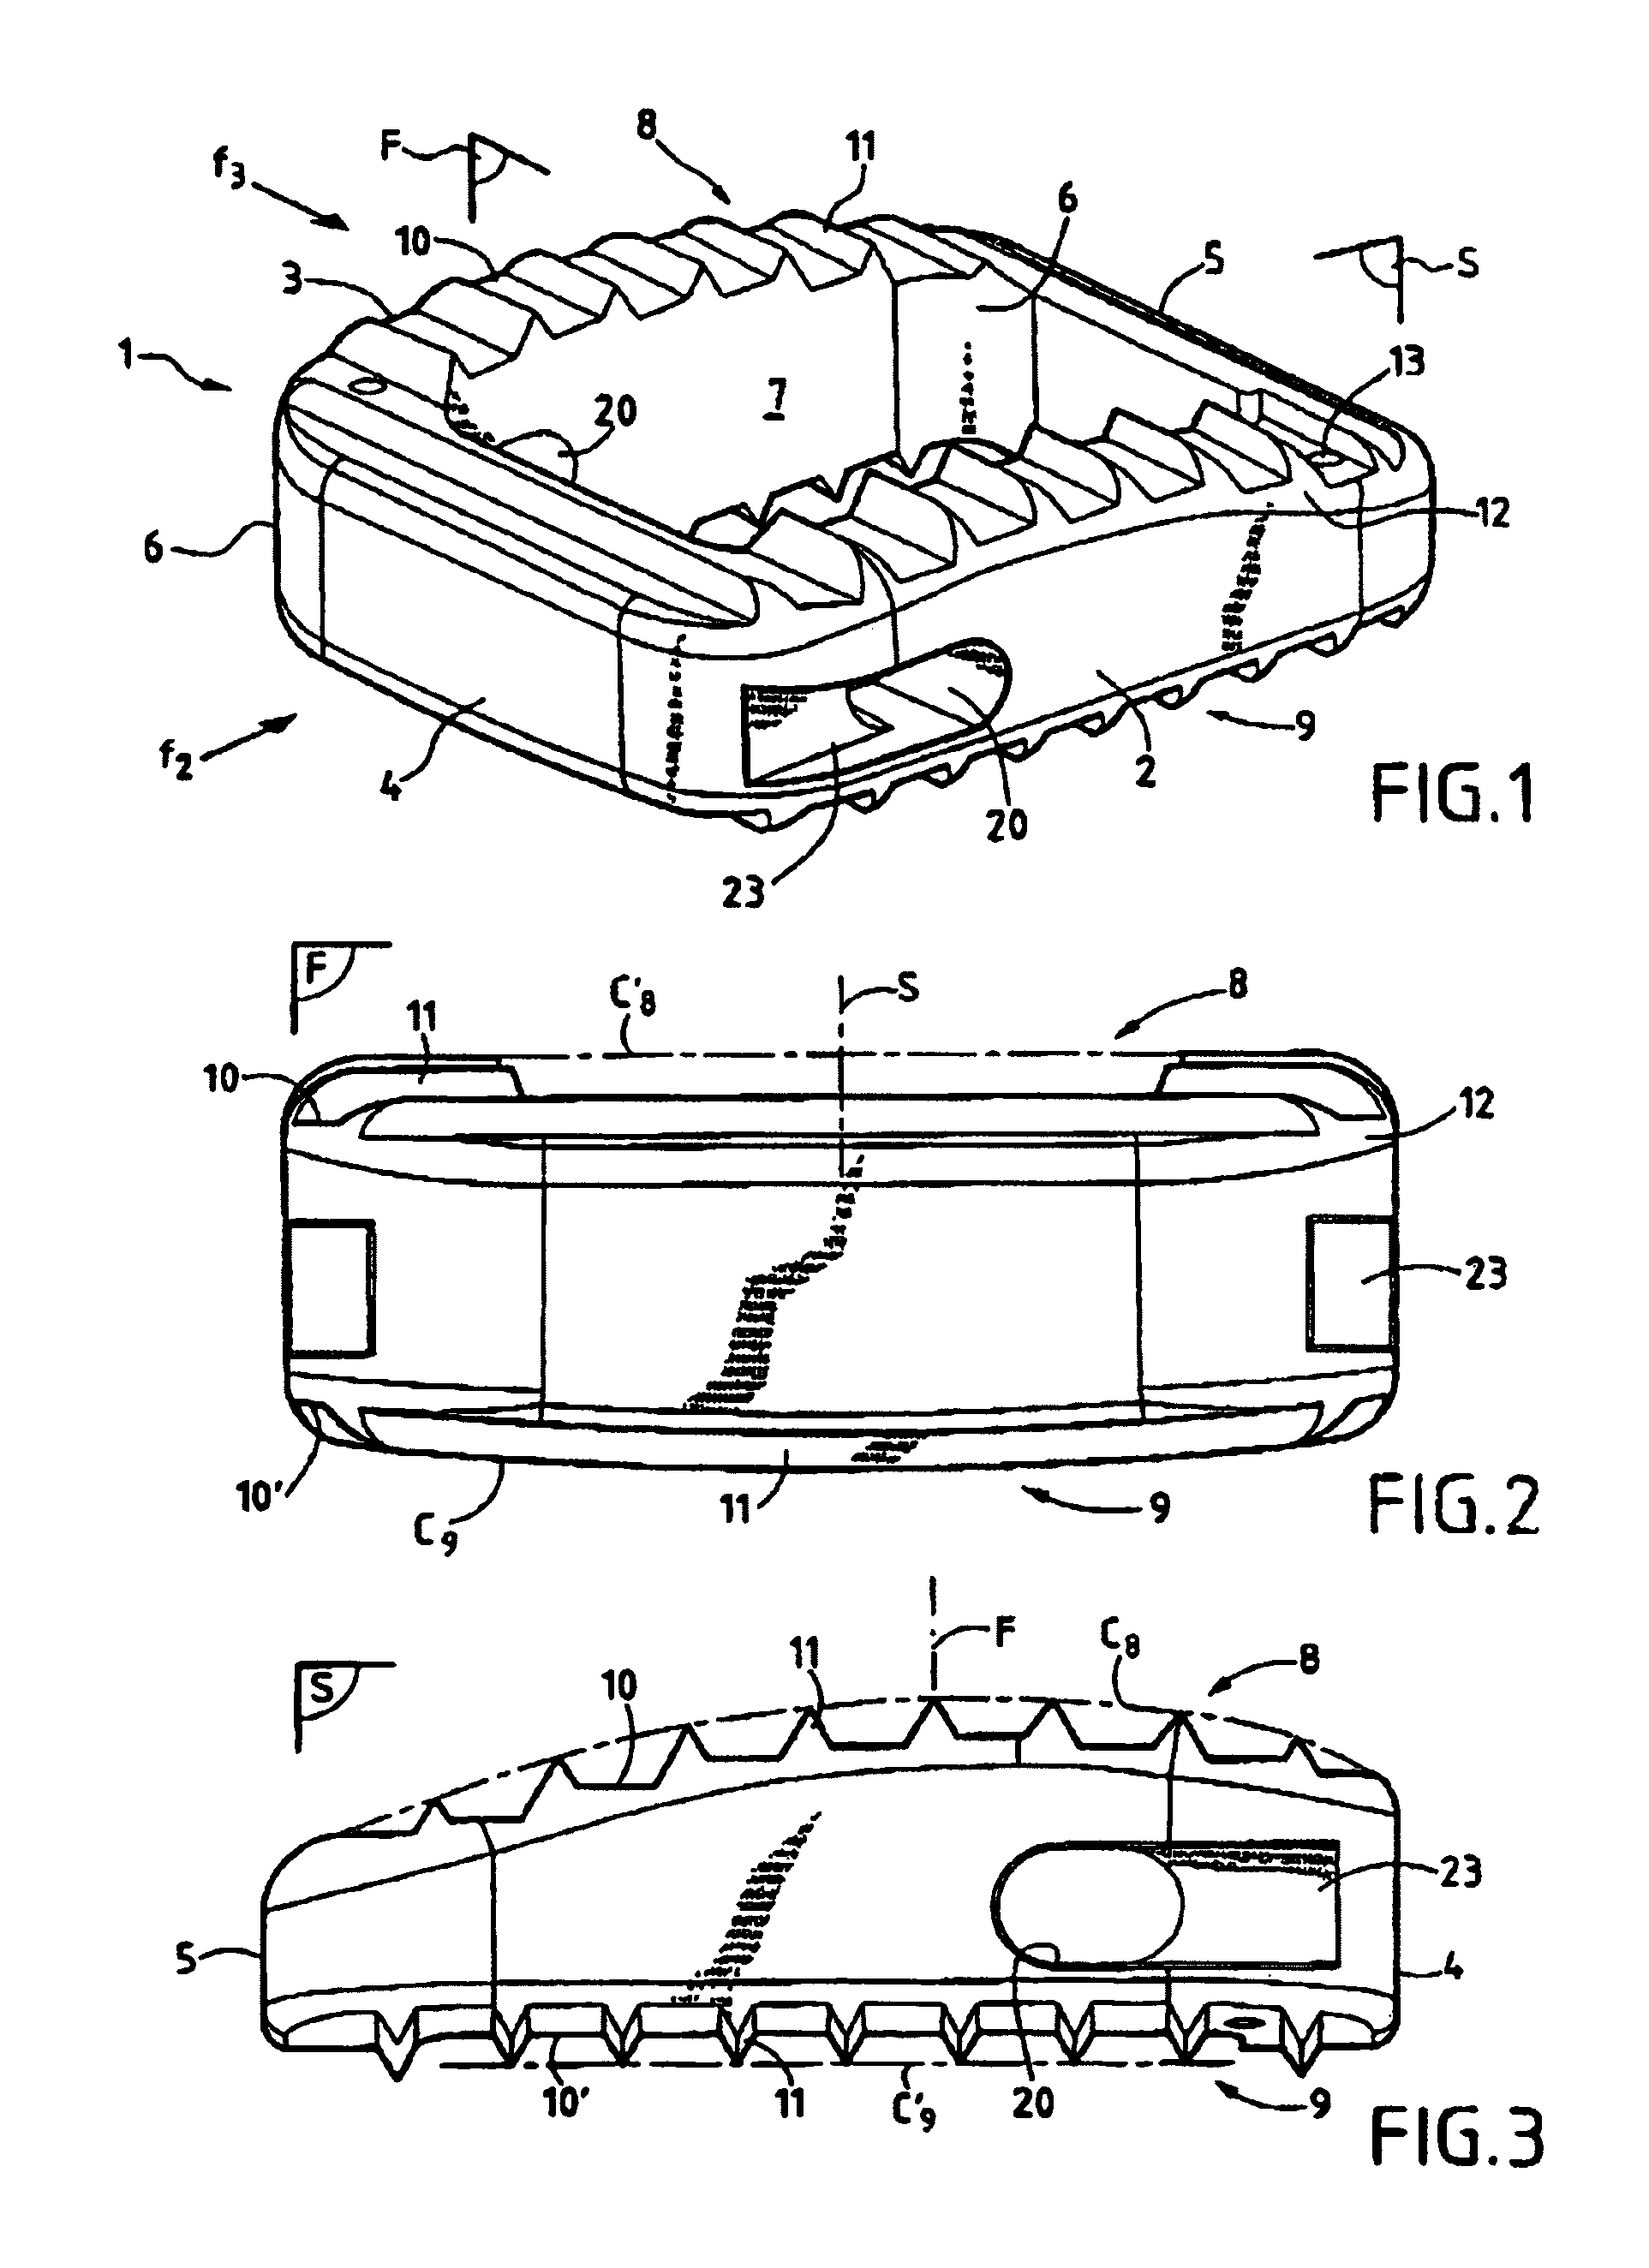 Anatomical interbody implant and gripper for same